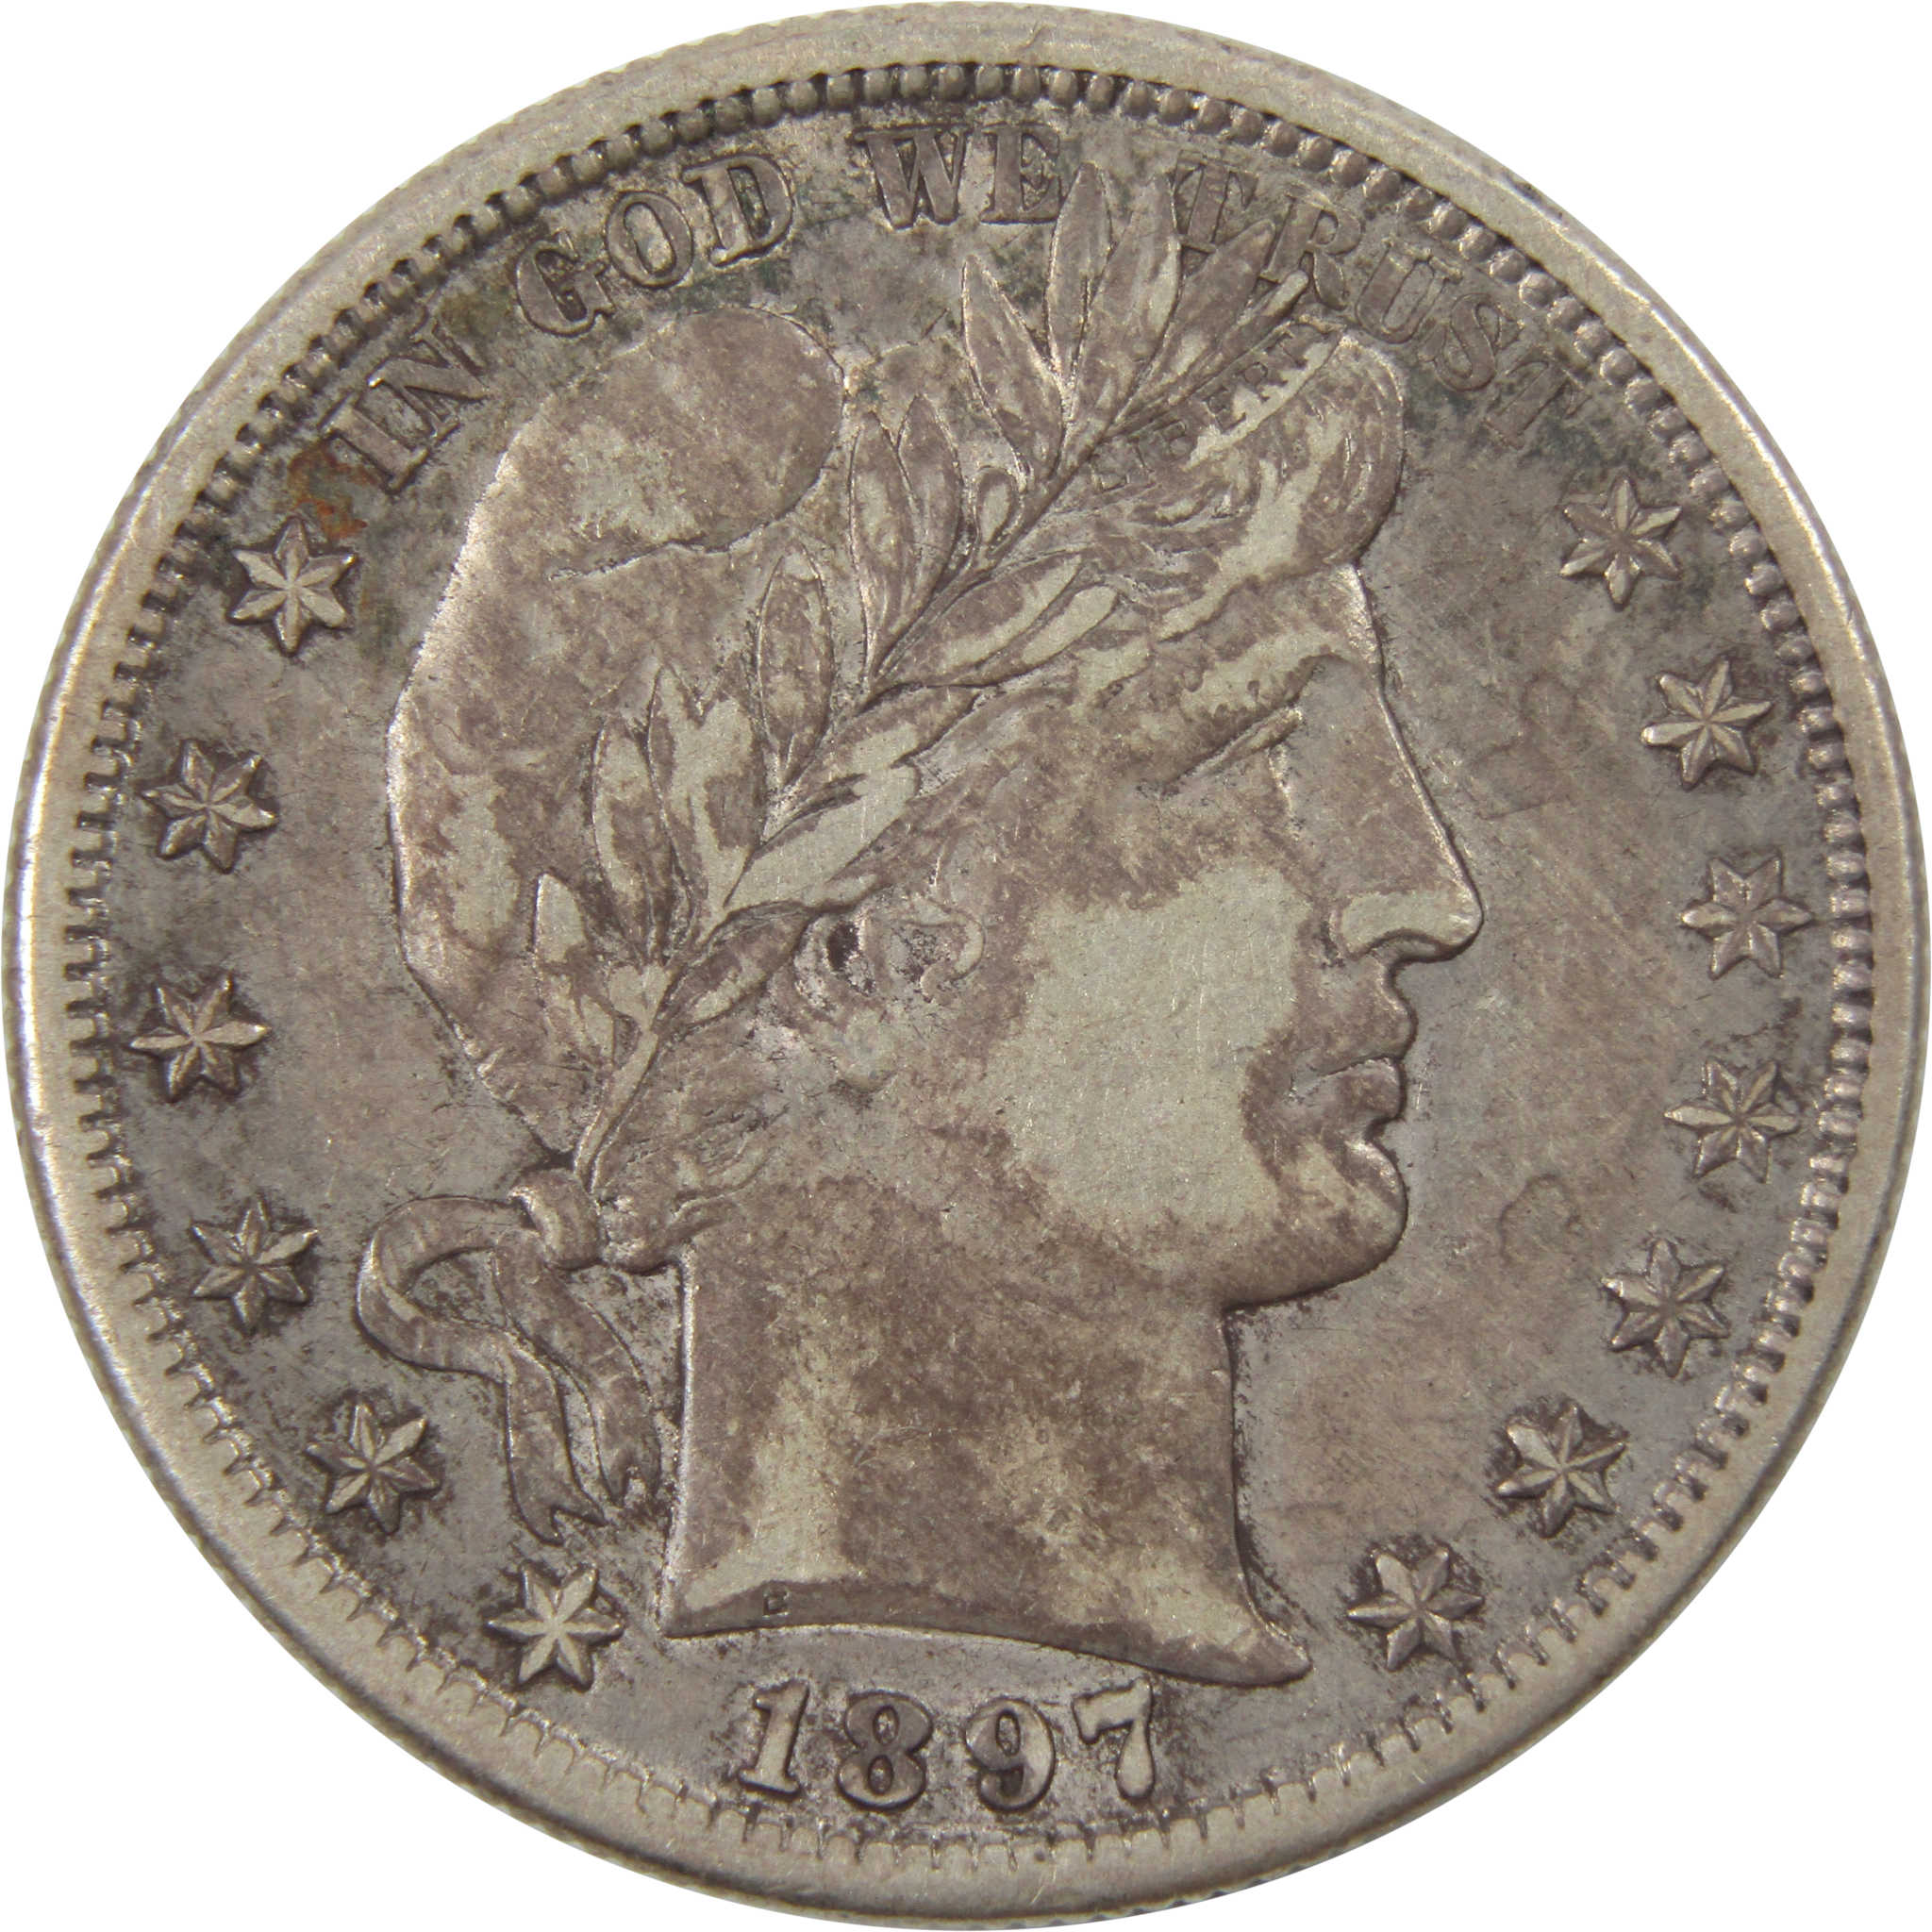 1897 S Barber Half Dollar XF EF Extremely Fine Silver Coin SKU: I10197